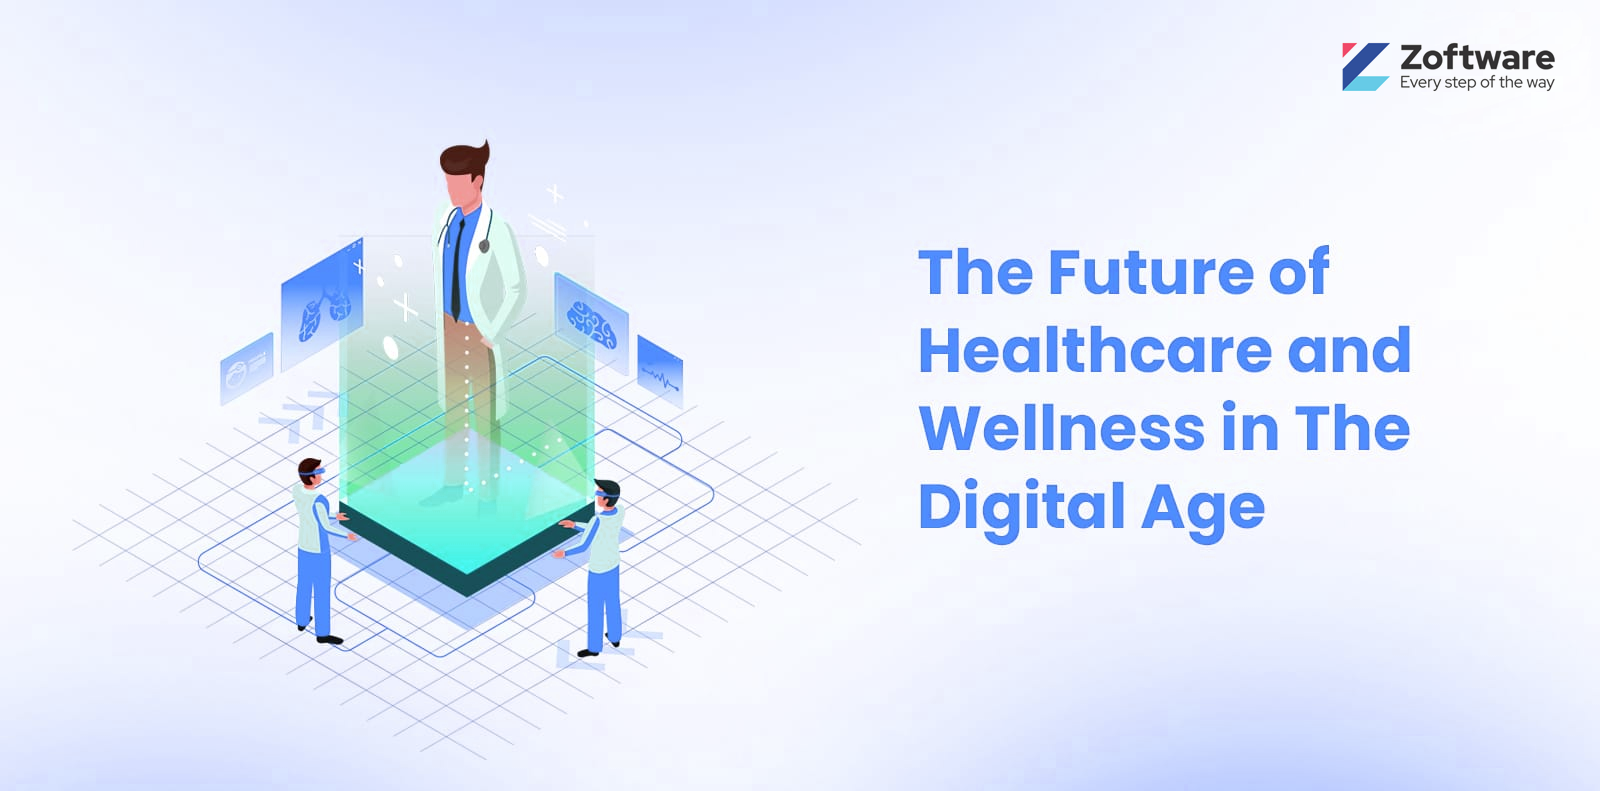 What are Healthcare and Wellness? What is Their Role in Modern Society